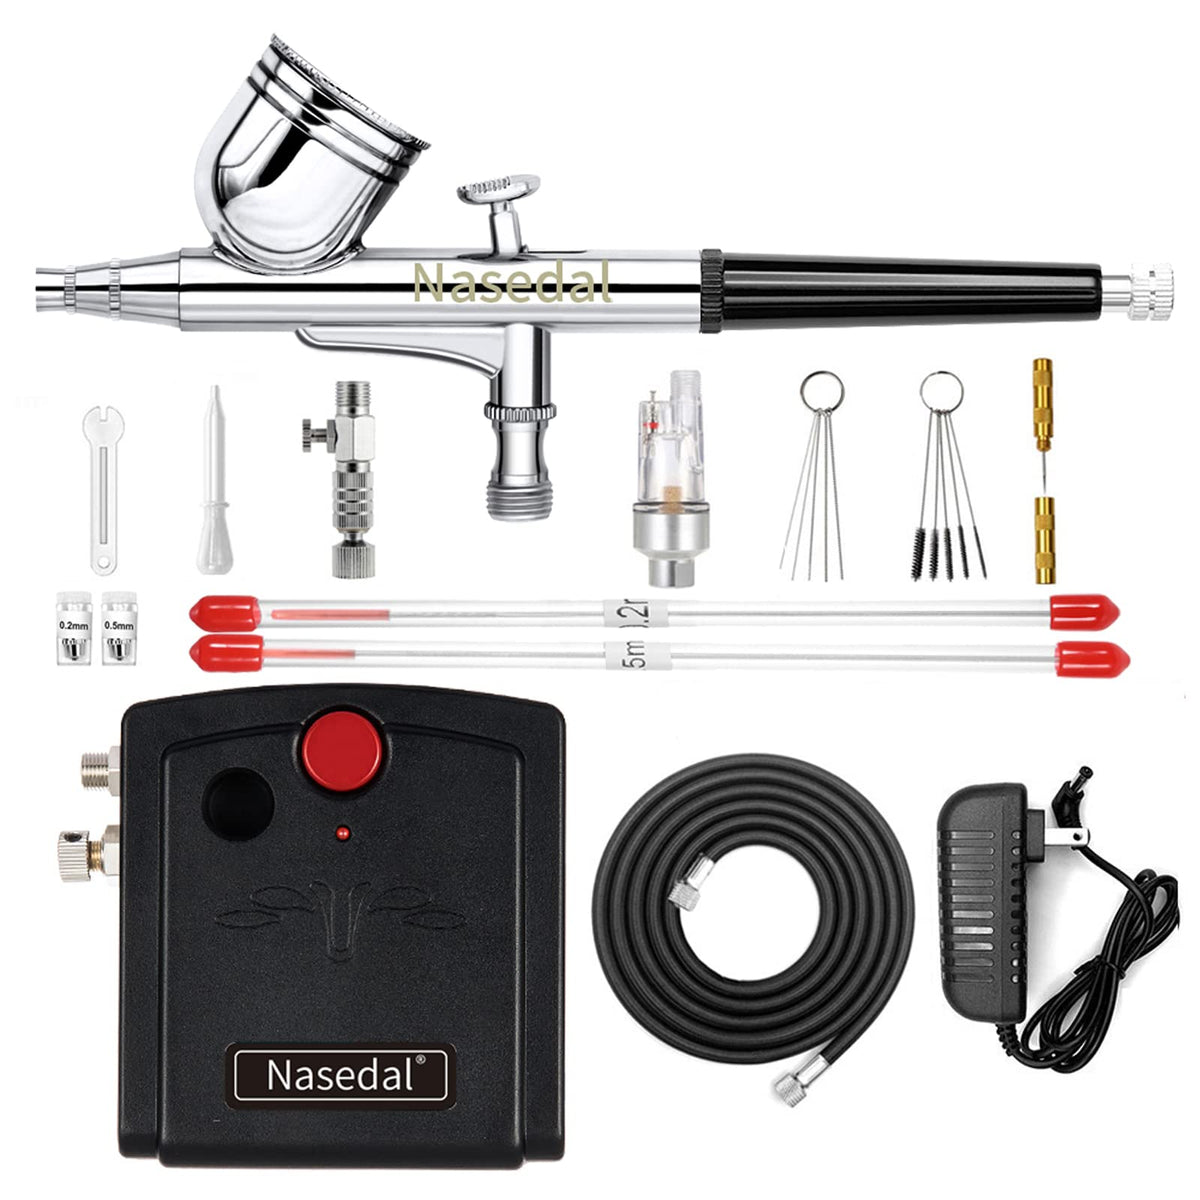 Dual-Action Airbrush with 30psi Auto Stop Compressor Kit Air Brush Spray  Gun for Makeup Nail